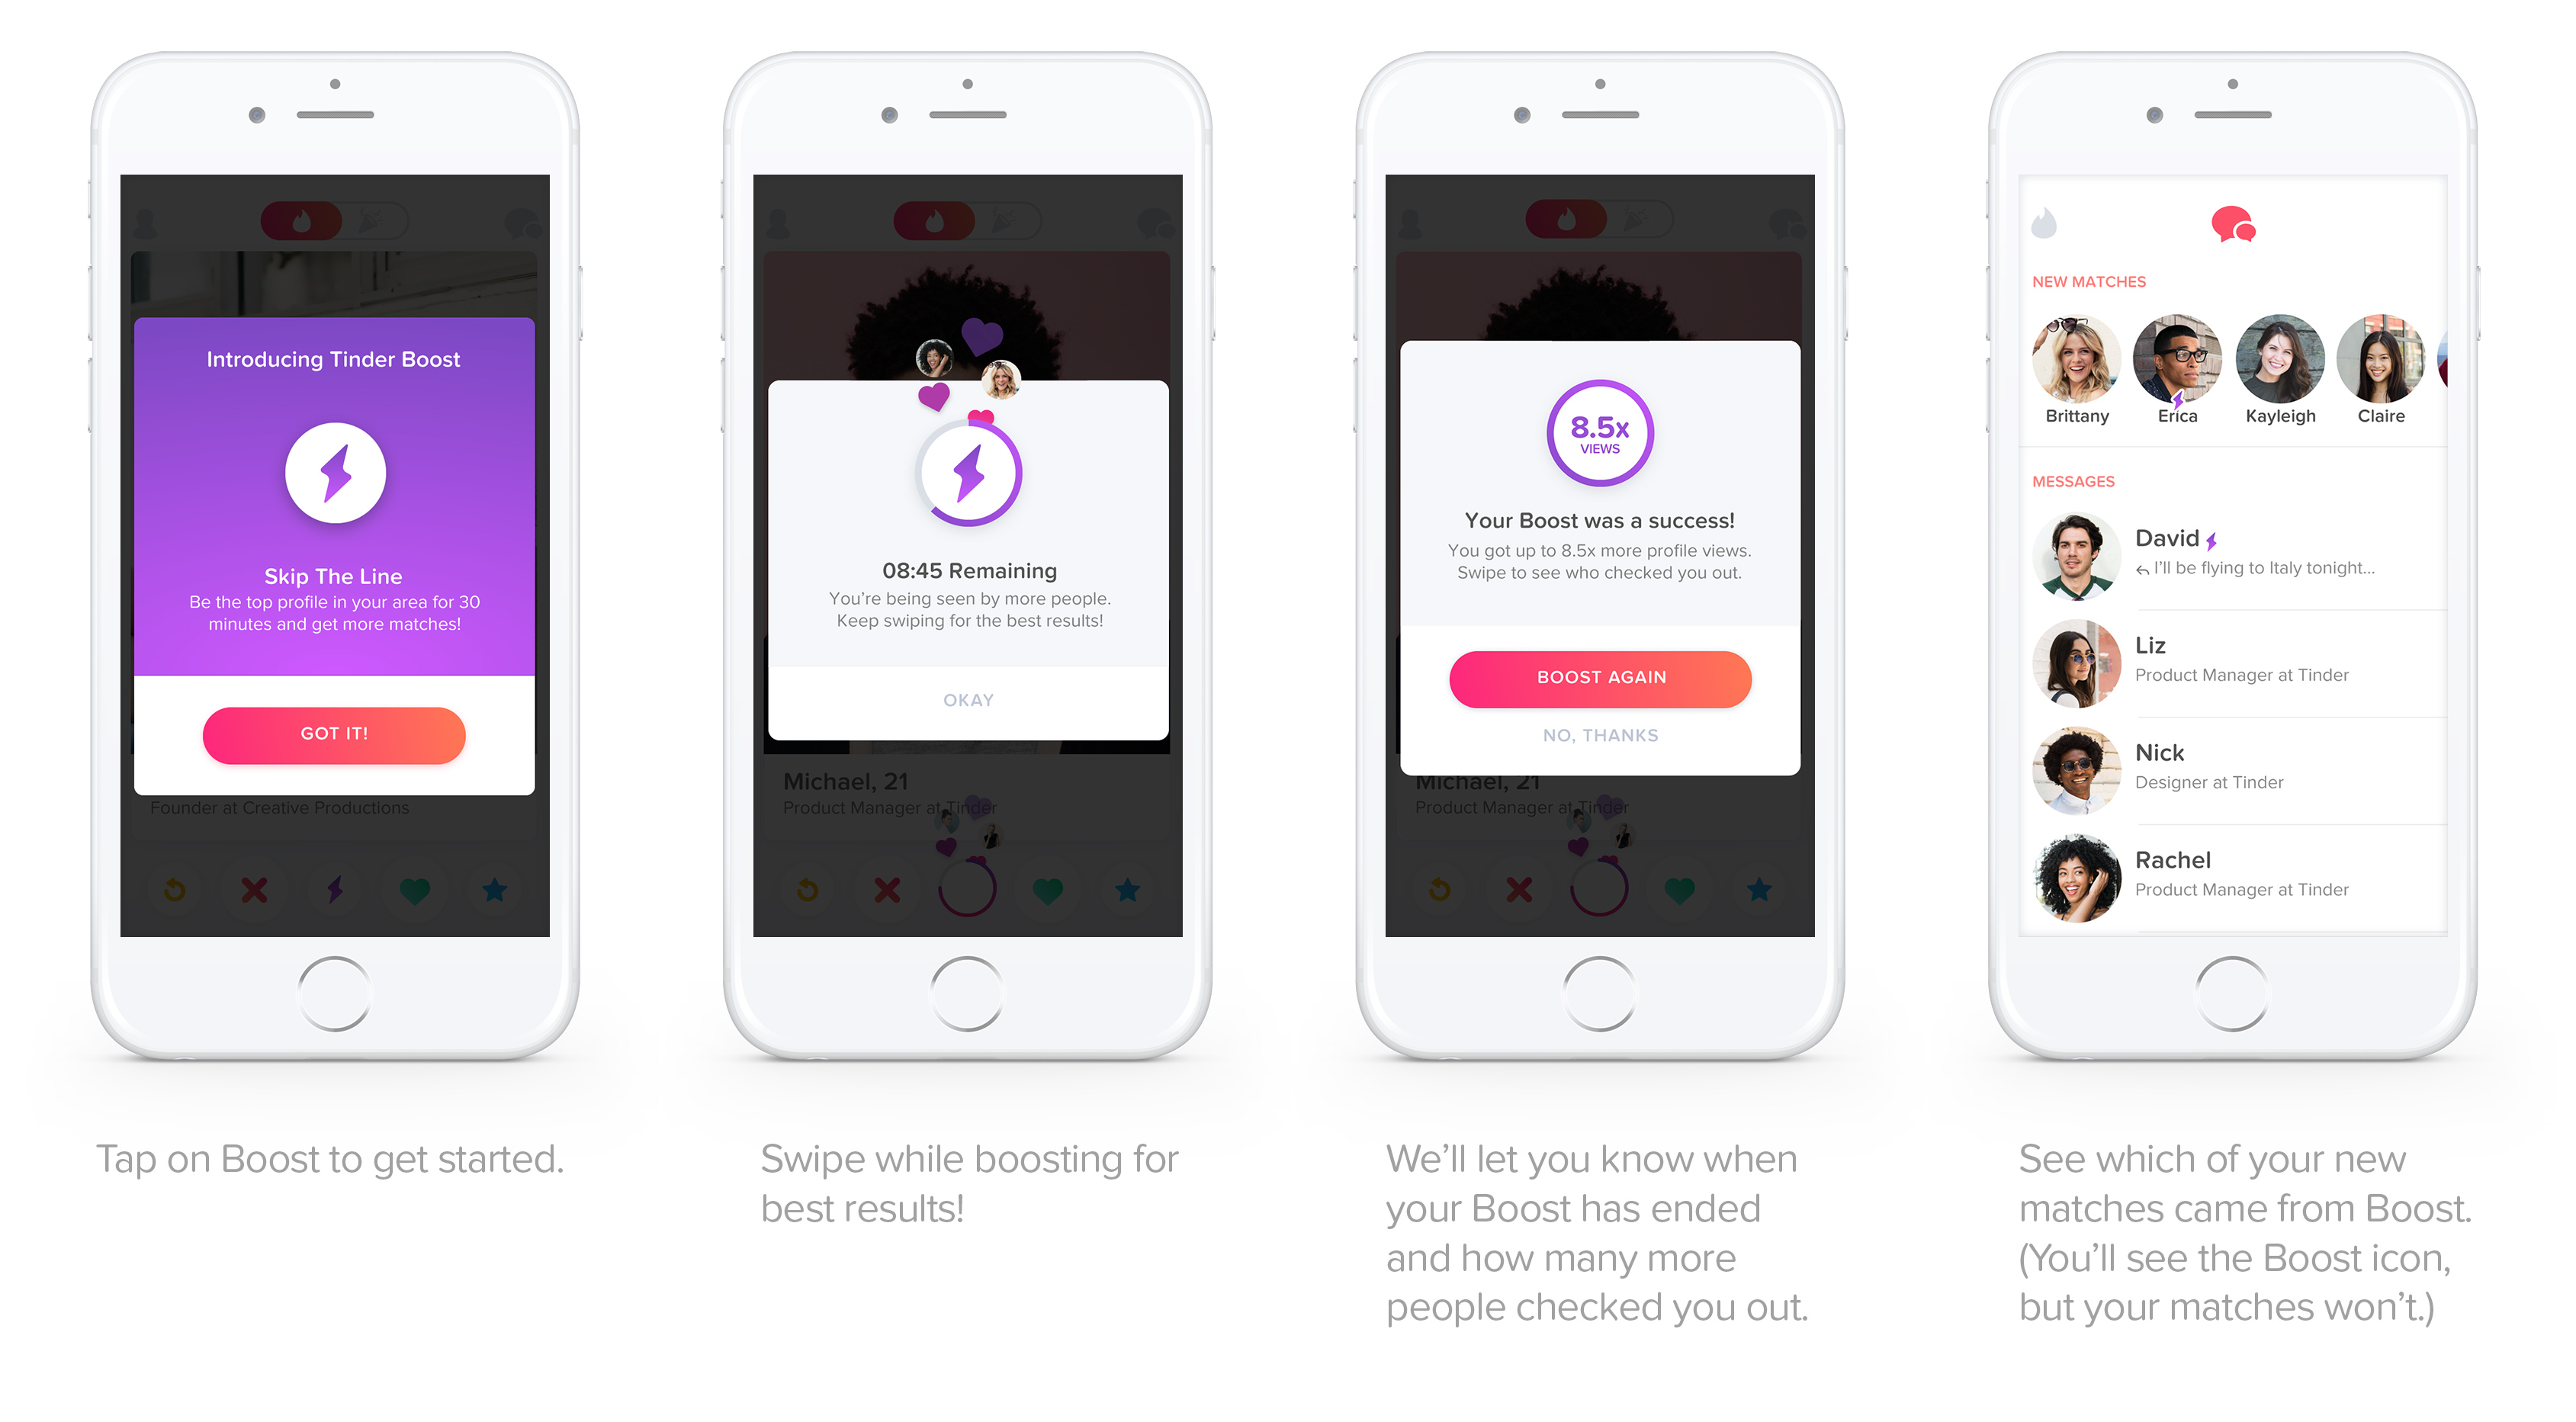 Tinder says it no longer uses a ‘desirability’ score to rank people